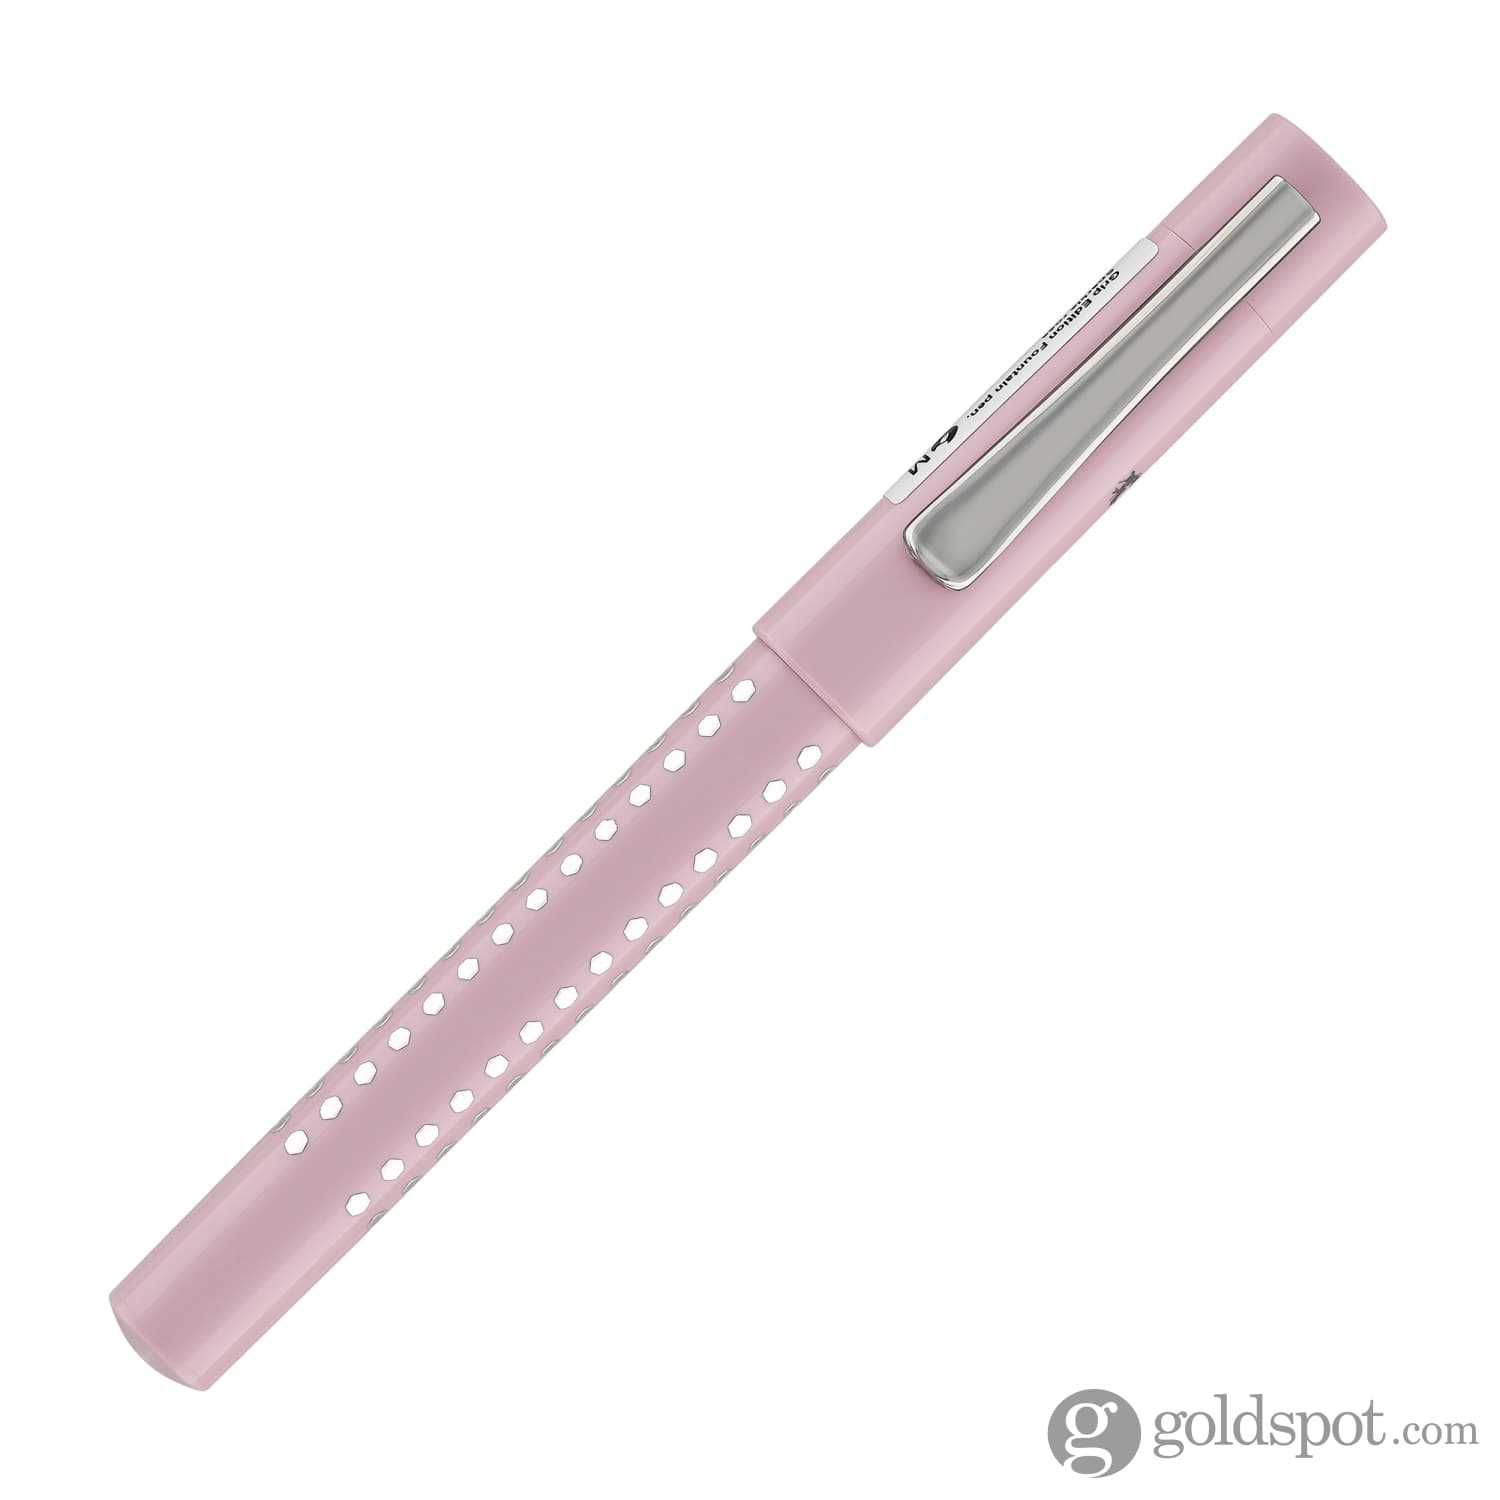 Faber-Castell Grip Sparkle Fountain Pen in Rose